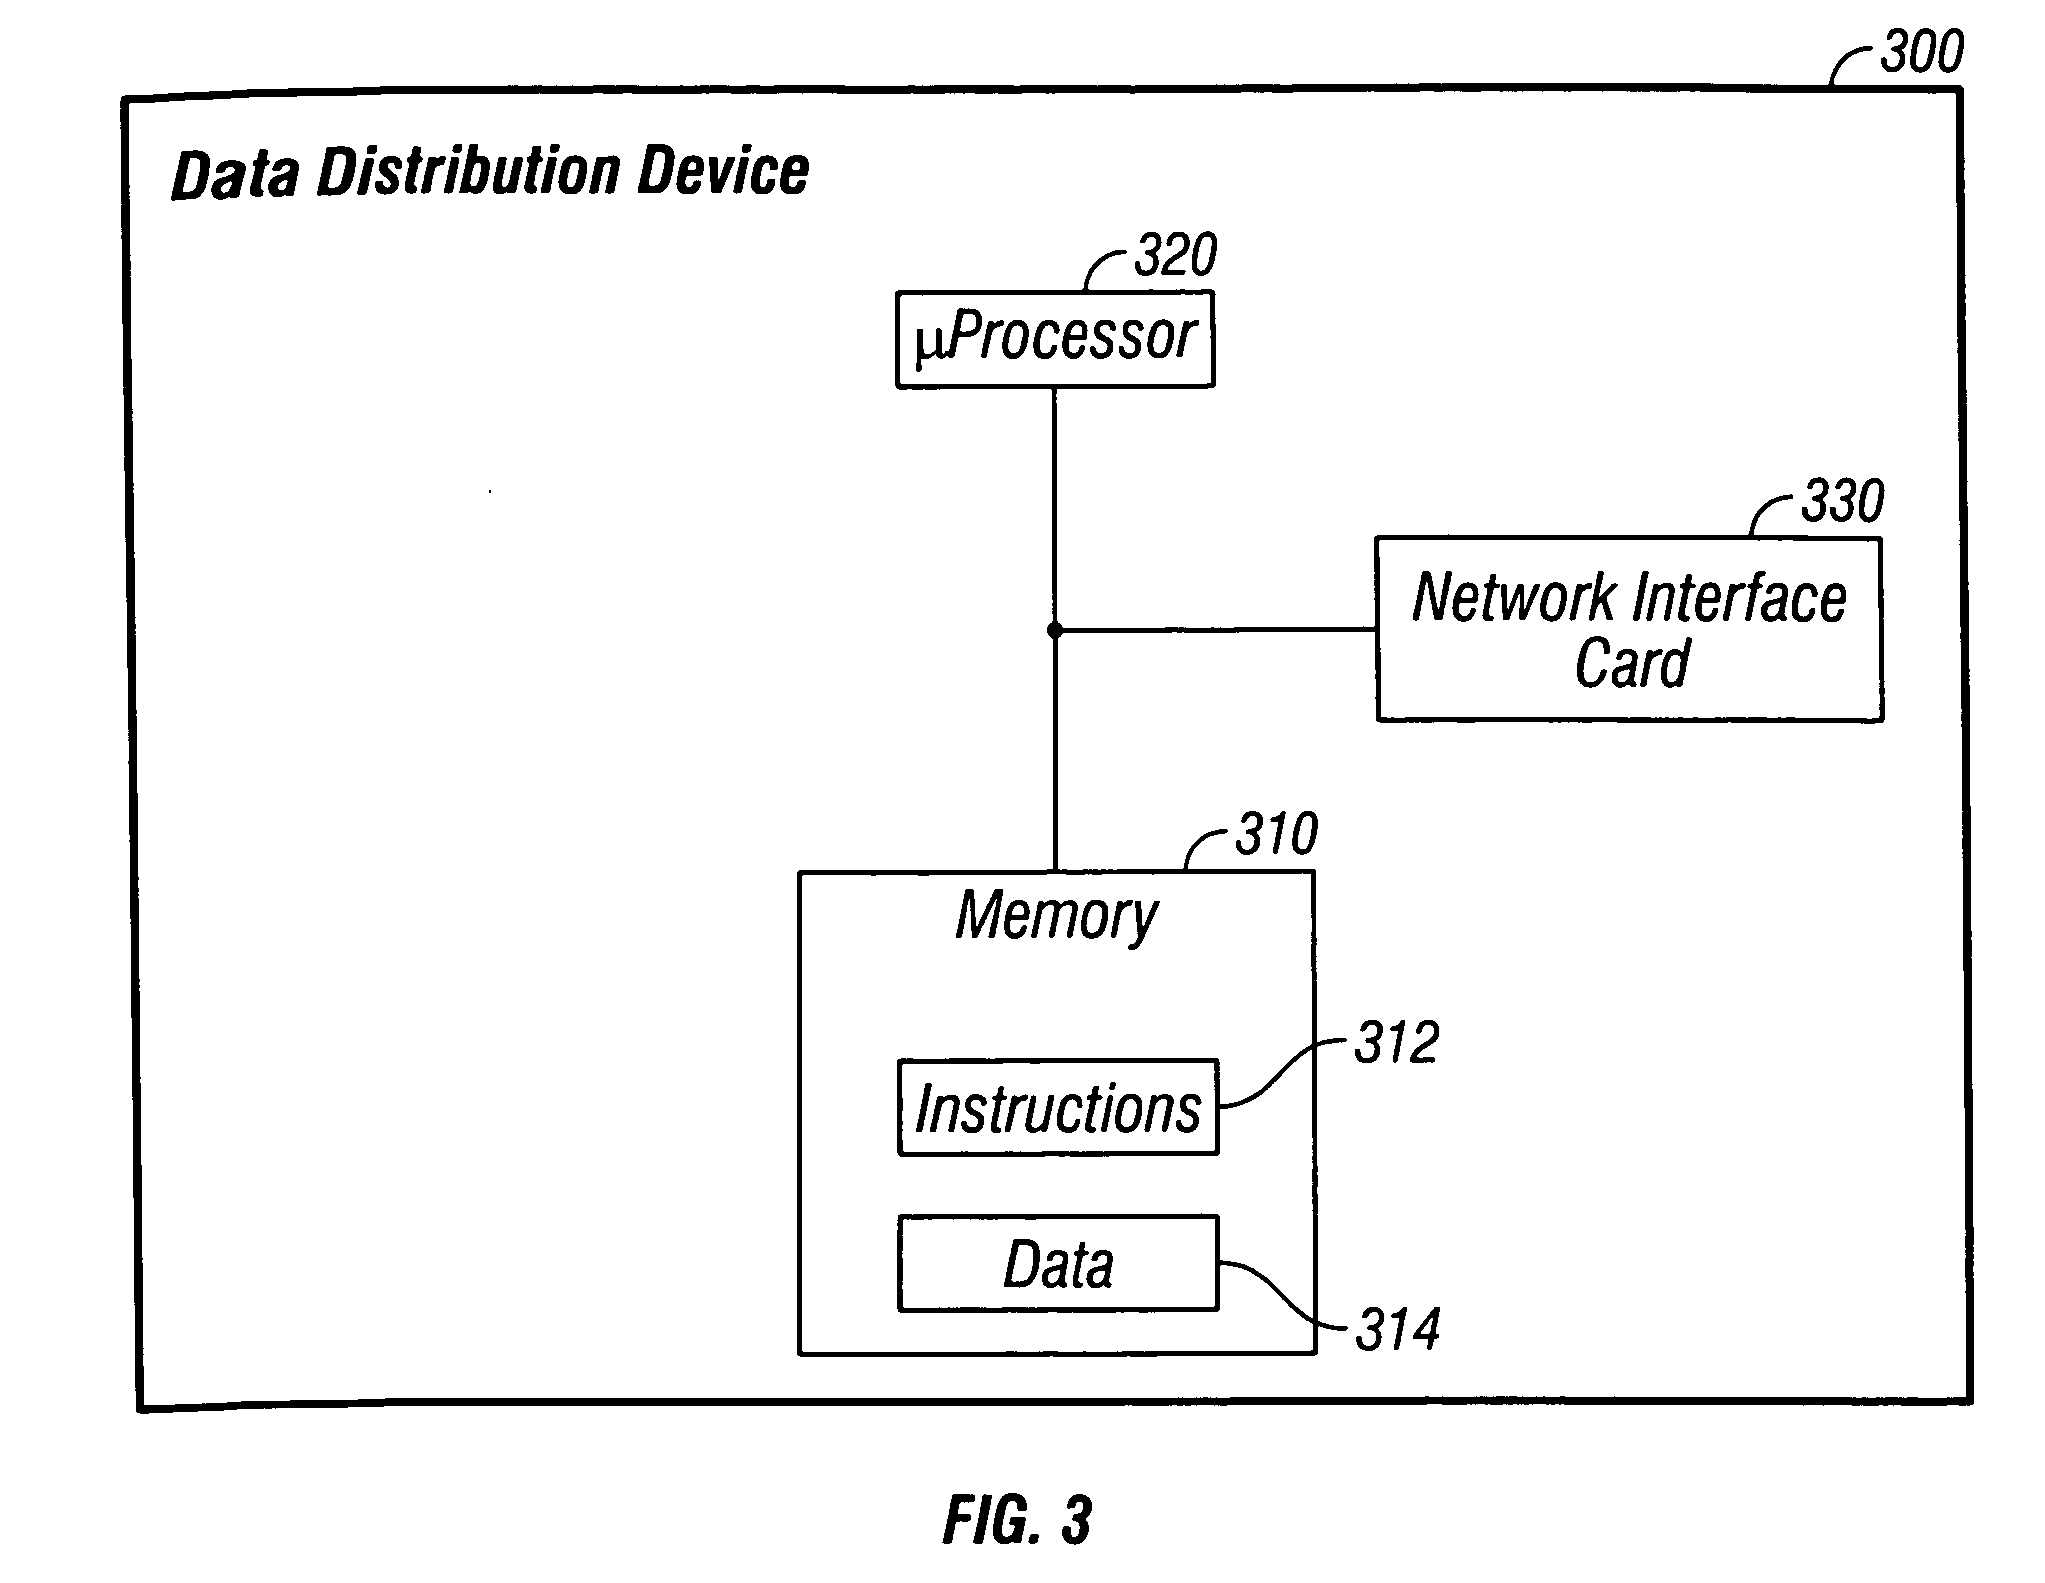 Selectively managing data conveyance between computing devices